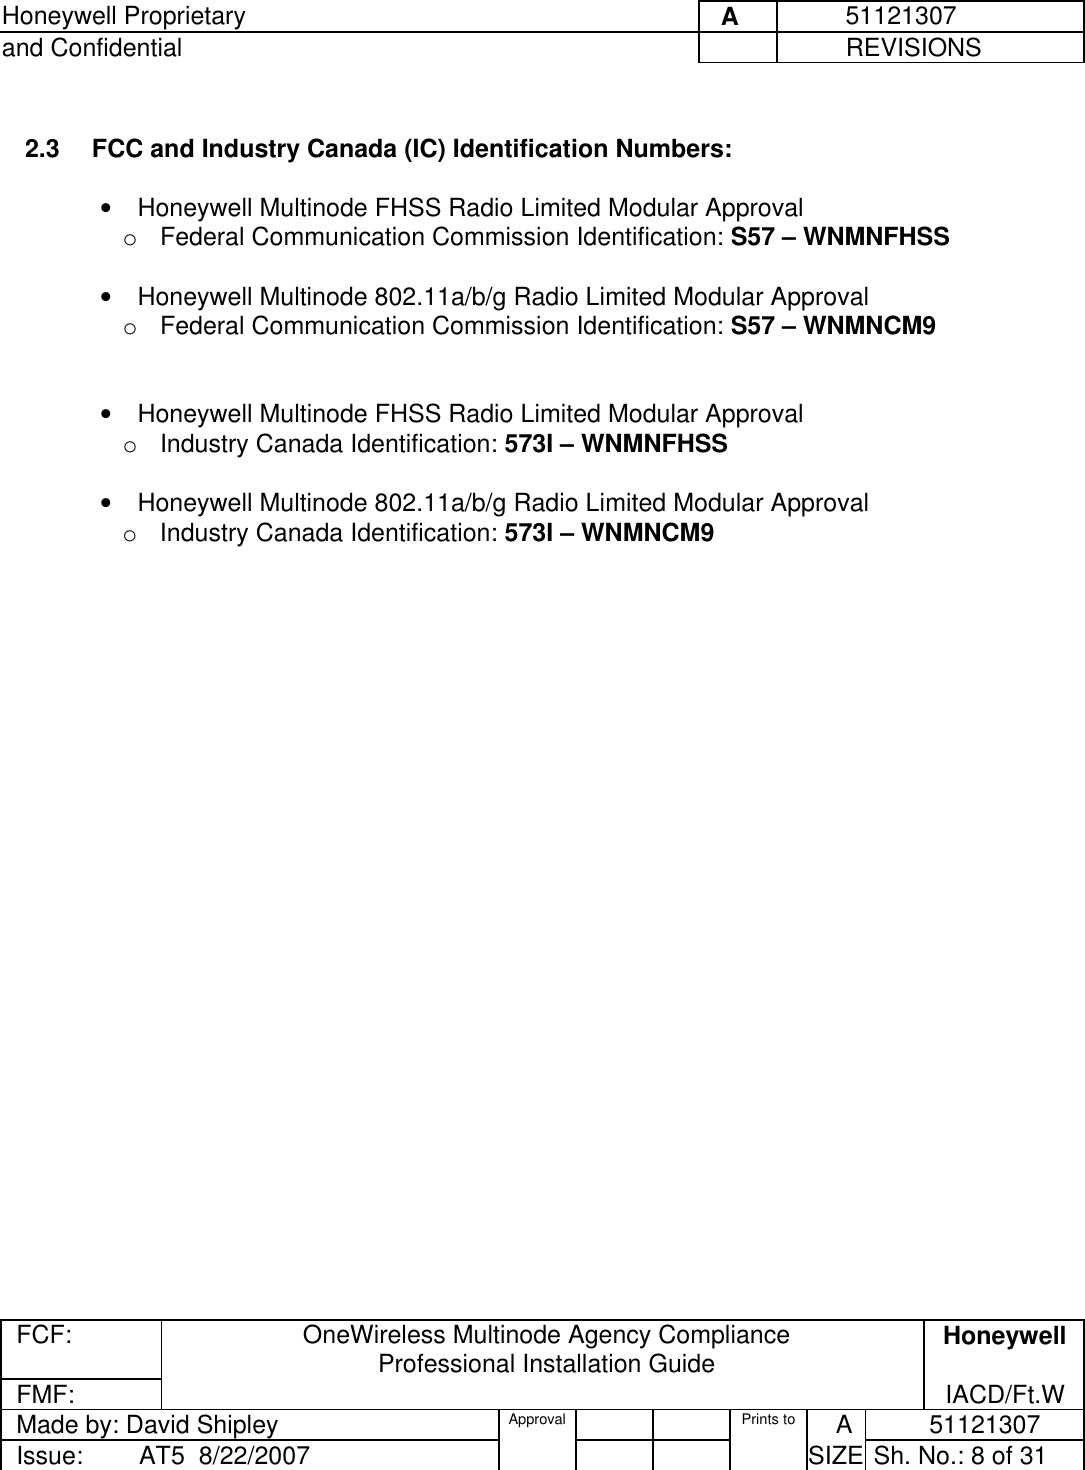 Honeywell Proprietary     A          51121307 and Confidential             REVISIONS  FCF:  OneWireless Multinode Agency Compliance Professional Installation Guide  Honeywell FMF:               IACD/Ft.W Made by: David Shipley  Approval   Prints to     A           51121307 Issue:        AT5  8/22/2007          SIZE  Sh. No.: 8 of 31   2.3   FCC and Industry Canada (IC) Identification Numbers:   •  Honeywell Multinode FHSS Radio Limited Modular Approval    o  Federal Communication Commission Identification: S57 – WNMNFHSS   •  Honeywell Multinode 802.11a/b/g Radio Limited Modular Approval    o  Federal Communication Commission Identification: S57 – WNMNCM9    •  Honeywell Multinode FHSS Radio Limited Modular Approval    o  Industry Canada Identification: 573I – WNMNFHSS   •  Honeywell Multinode 802.11a/b/g Radio Limited Modular Approval    o  Industry Canada Identification: 573I – WNMNCM9    